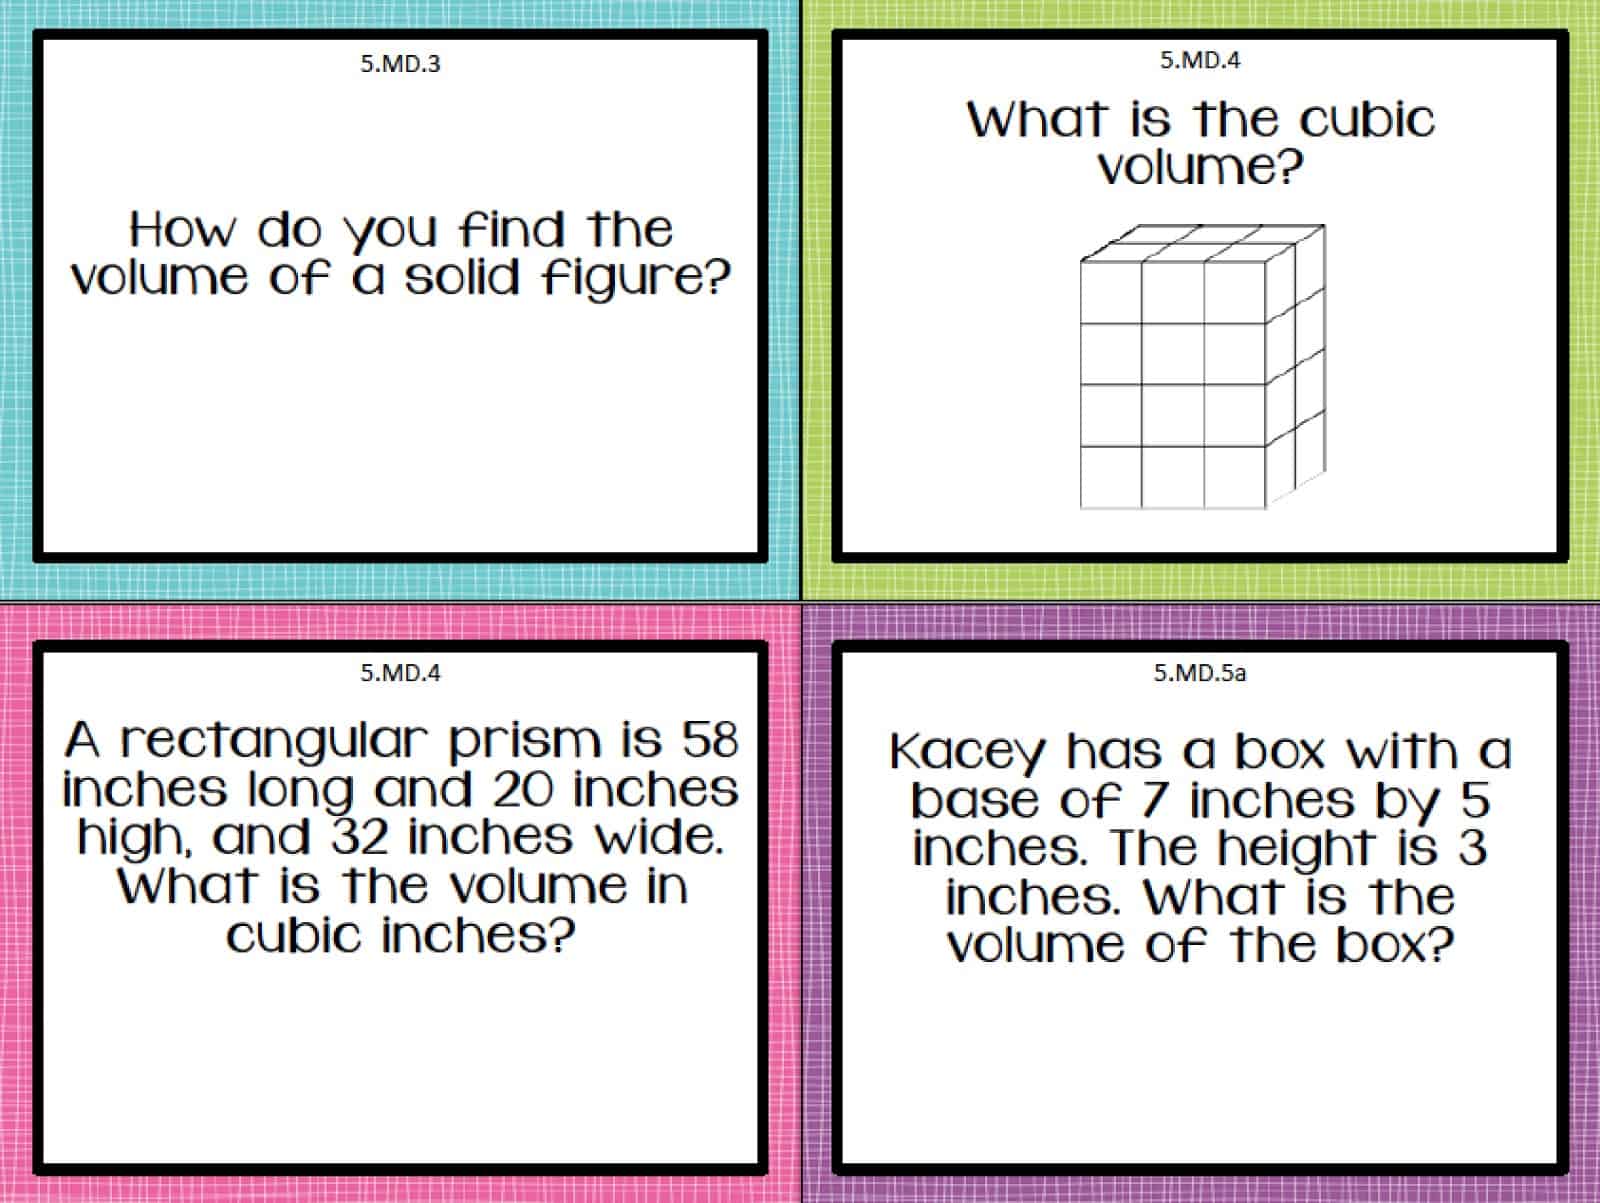 Do you wish you had more diagnostic math assessments to learn where your upper elementary students are at in math class? I've created several of these diagnostic assessments based on the Common Core State Standards, and they're explained in this blog post! These will give you more data about where your students are with math mastery and will help you better tailor your instruction. Click through to read more!